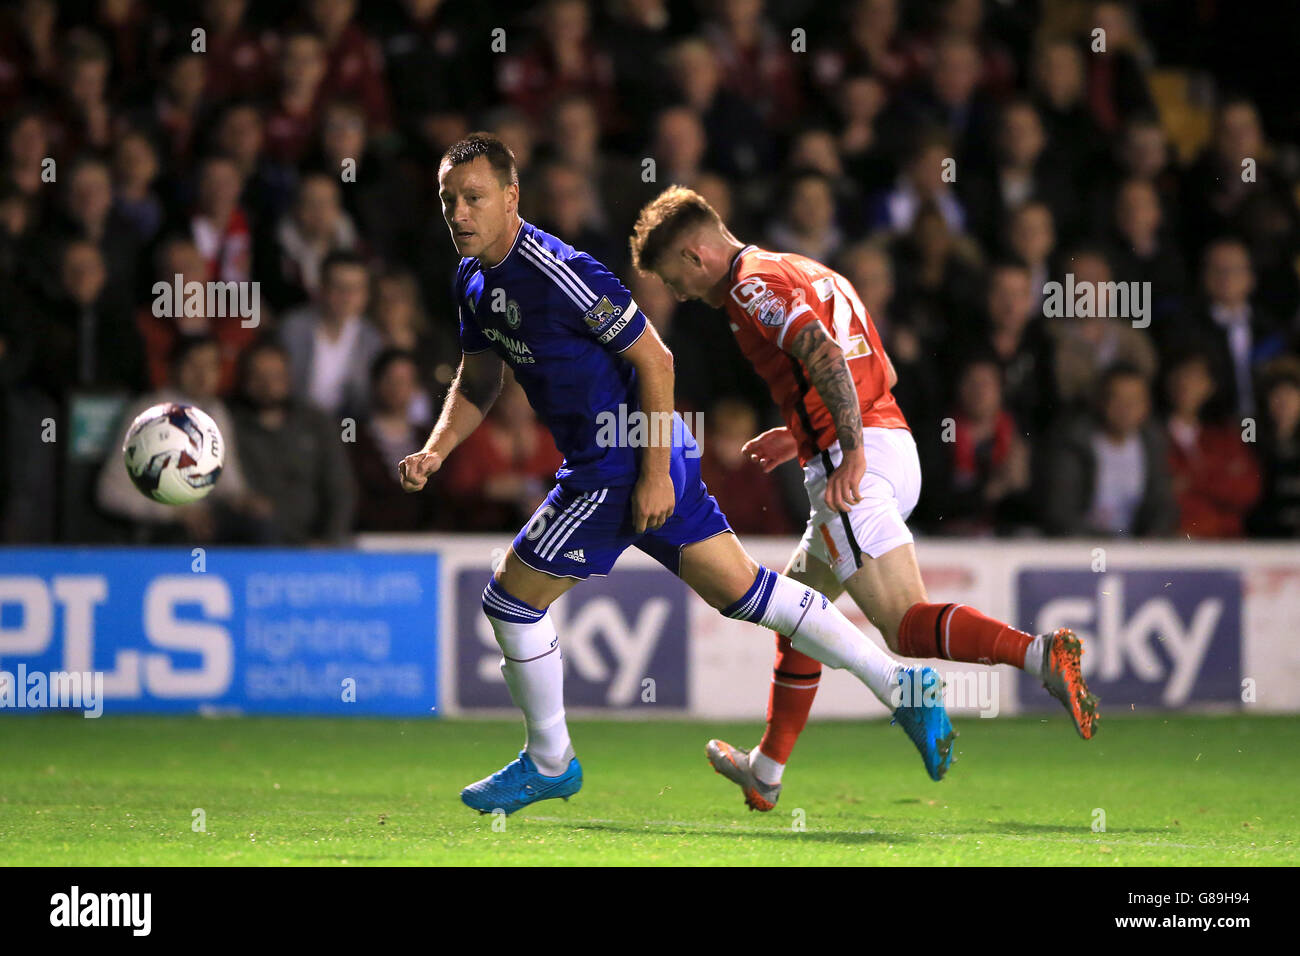 Chelsea's John Terry and Walsall's Jordan Cook (right) battle for the ball during the Capital One Cup, third round match at Banks' Stadium, Walsall. Stock Photo